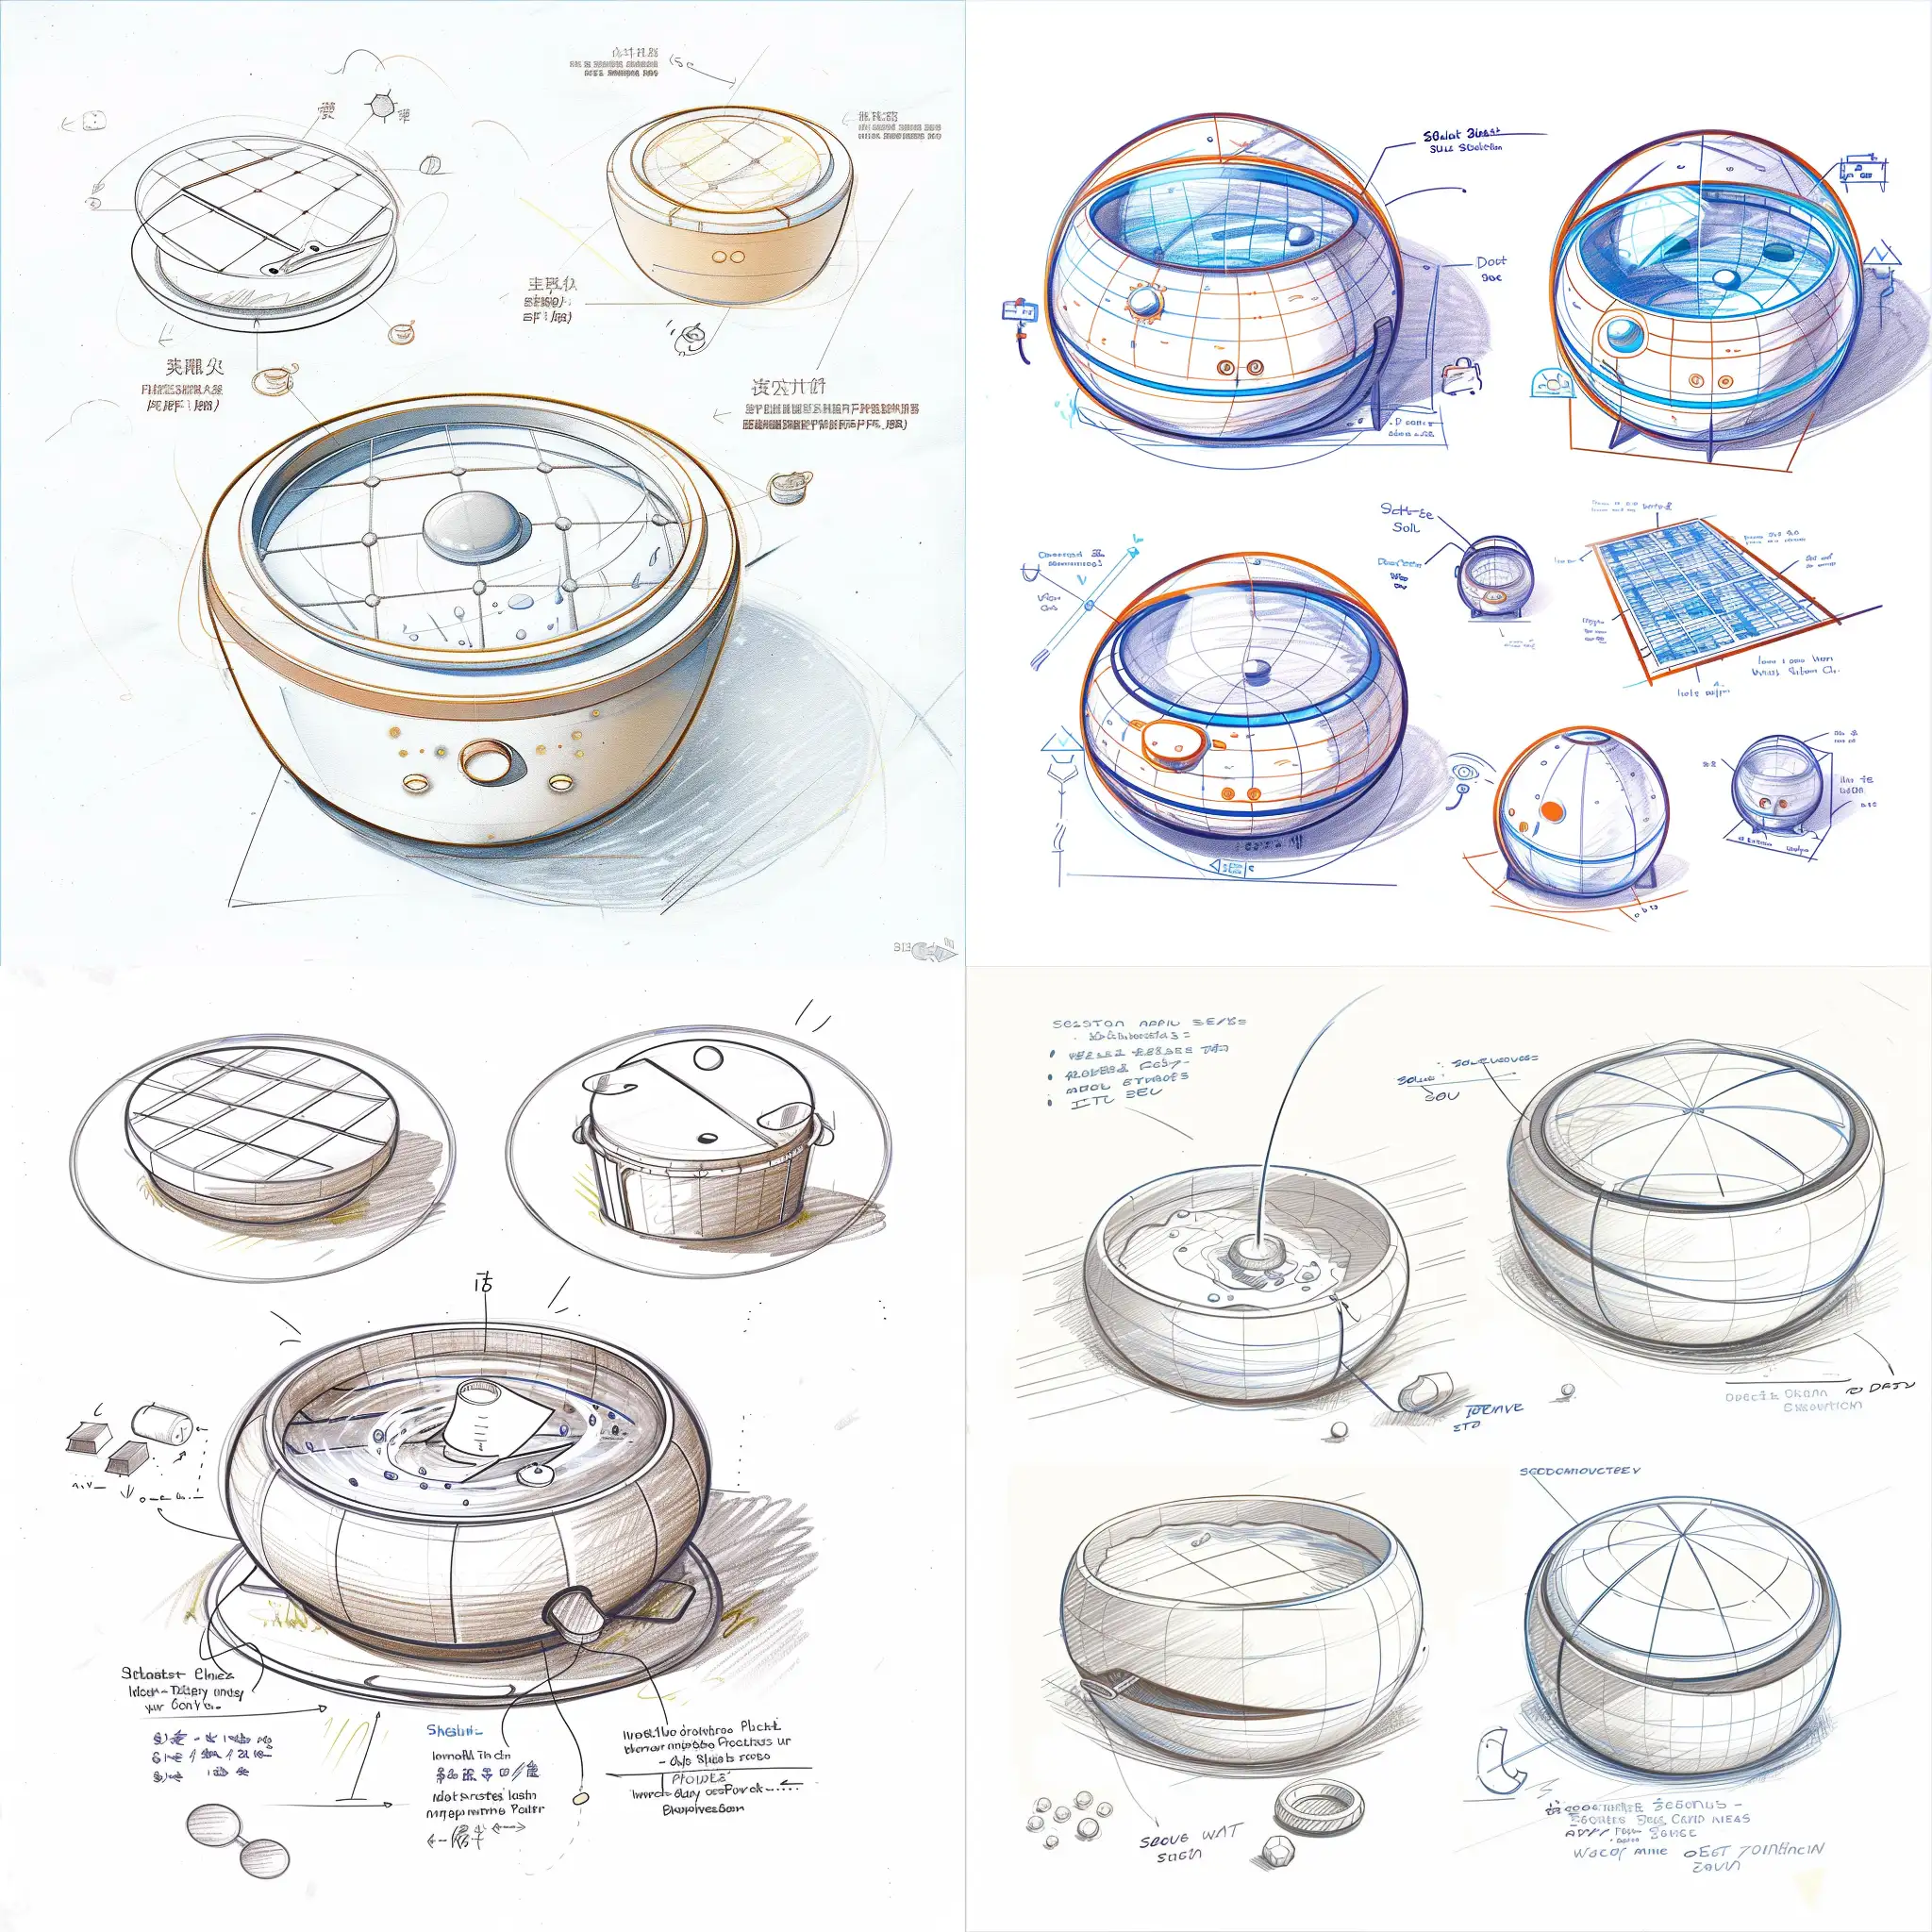 Product design, children's water drive bowl design, small and cute portable, design sketch scheme, hand-drawn sketch, line draft, drawing reference, product design sketch, white background, front view, side view, rear view, drawings from different angles, each scheme should present the modeling source and intention, detailed drawing, explosion diagram, use scene diagram, human-computer interaction diagram, without color
Product design, children's waterflood bowl design, small and cute portable, design sketch scheme, hand-drawn sketch, line draft, drawing reference, product design sketch, white background, front view, side view, rear view, drawings from different angles, each scheme should present modeling source and intention, detailed drawing, explosion diagram, use scene diagram, human-computer interaction diagram, no color
Solar panels and water insulation bowl combined, solar panels are not too obvious, absorb solar energy, auxiliary insulation cute and round, easy to carry